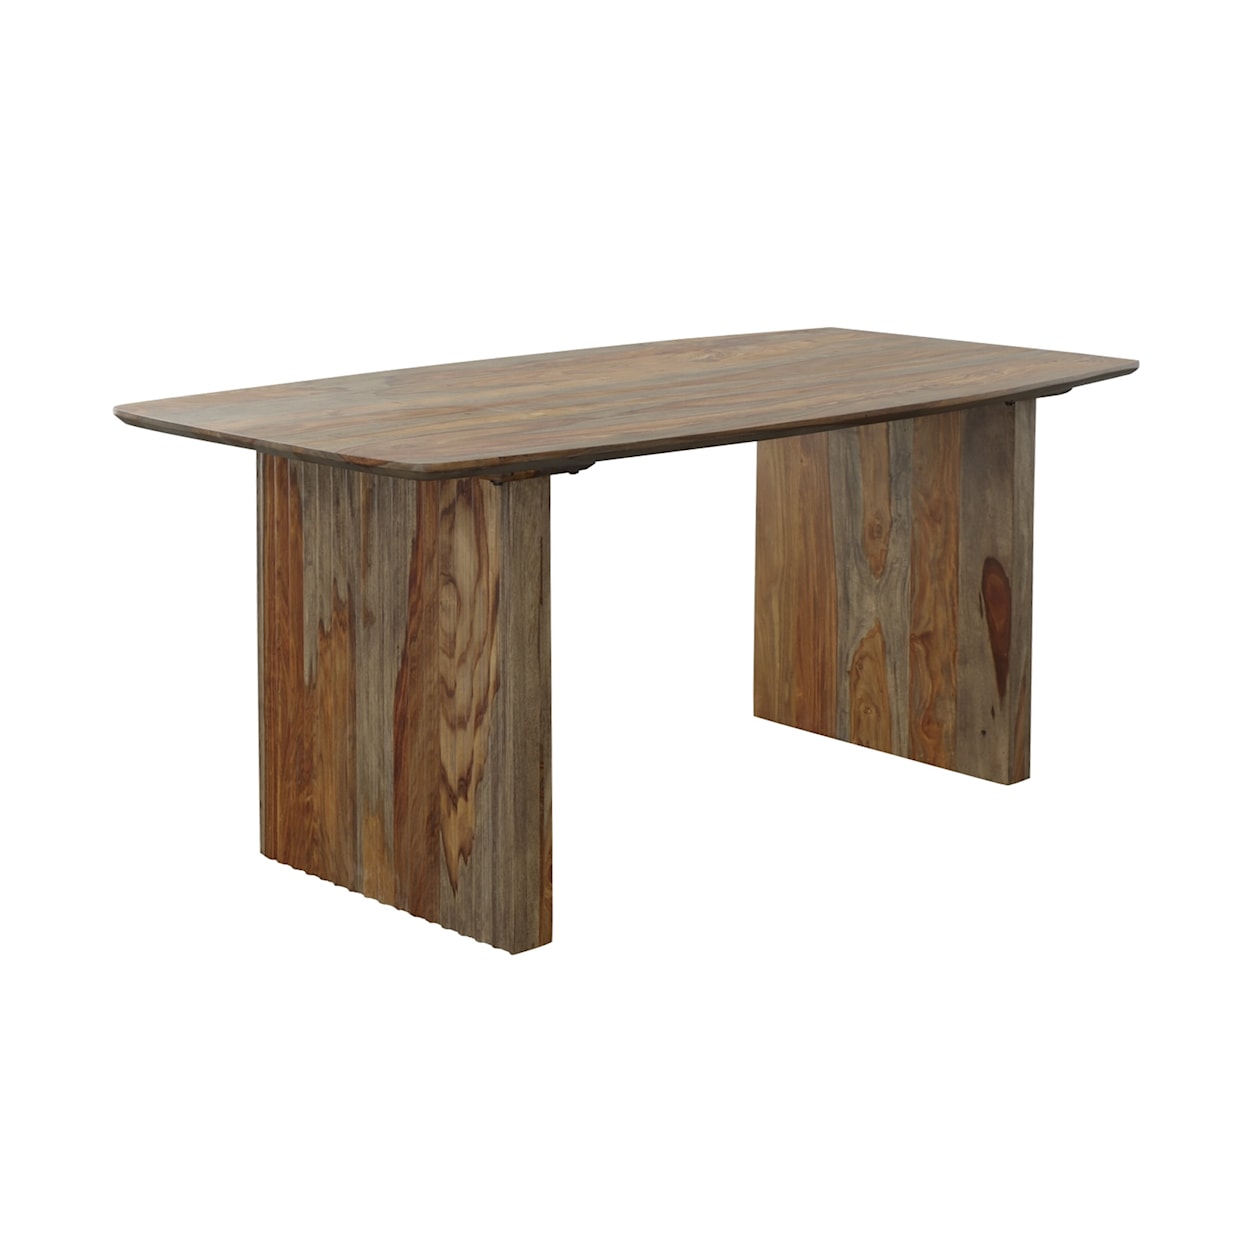 C2C Waverly Valley Dining Table